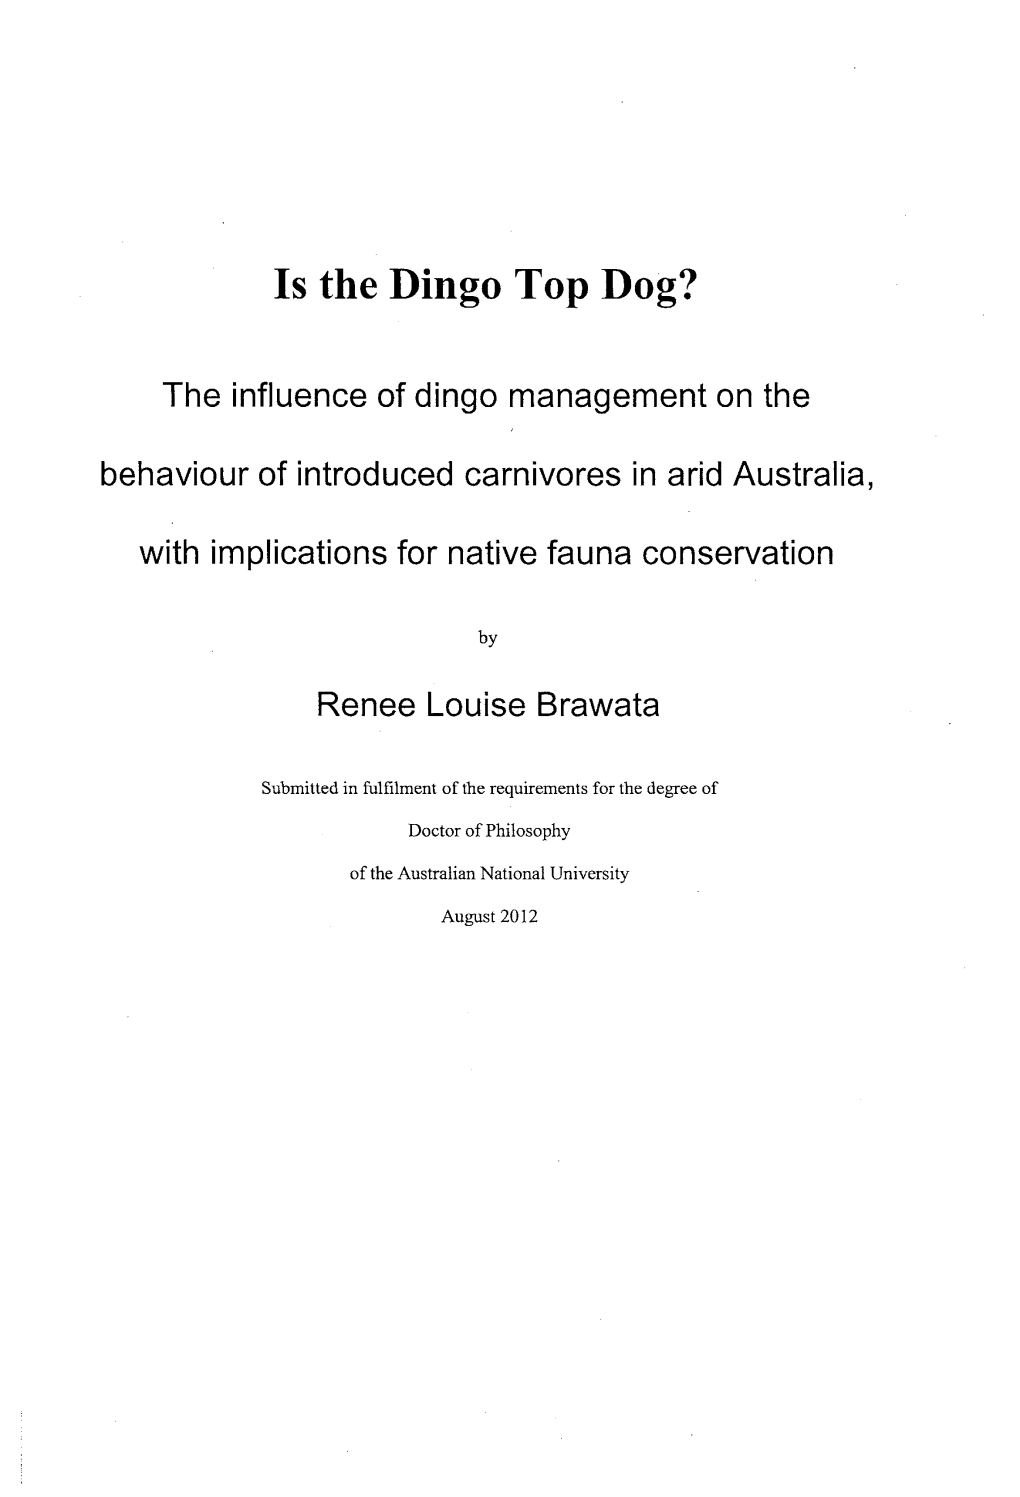 Is the Dingo Top Dog?